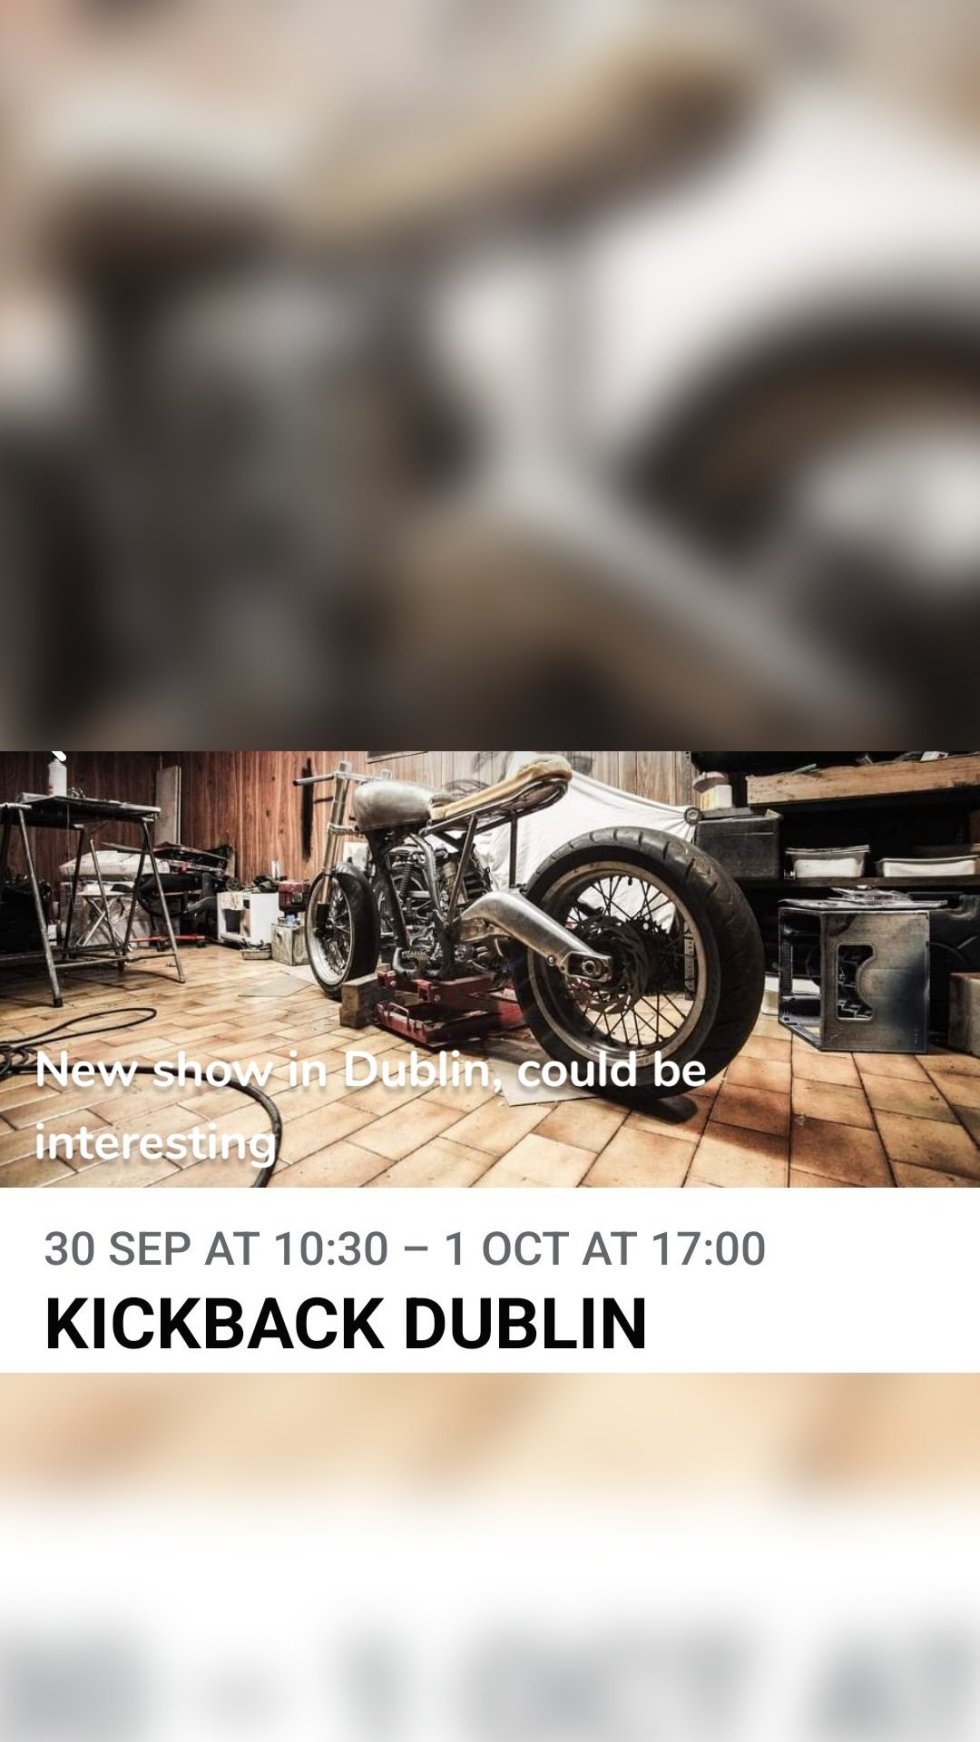 New show in Dublin, could be interesting